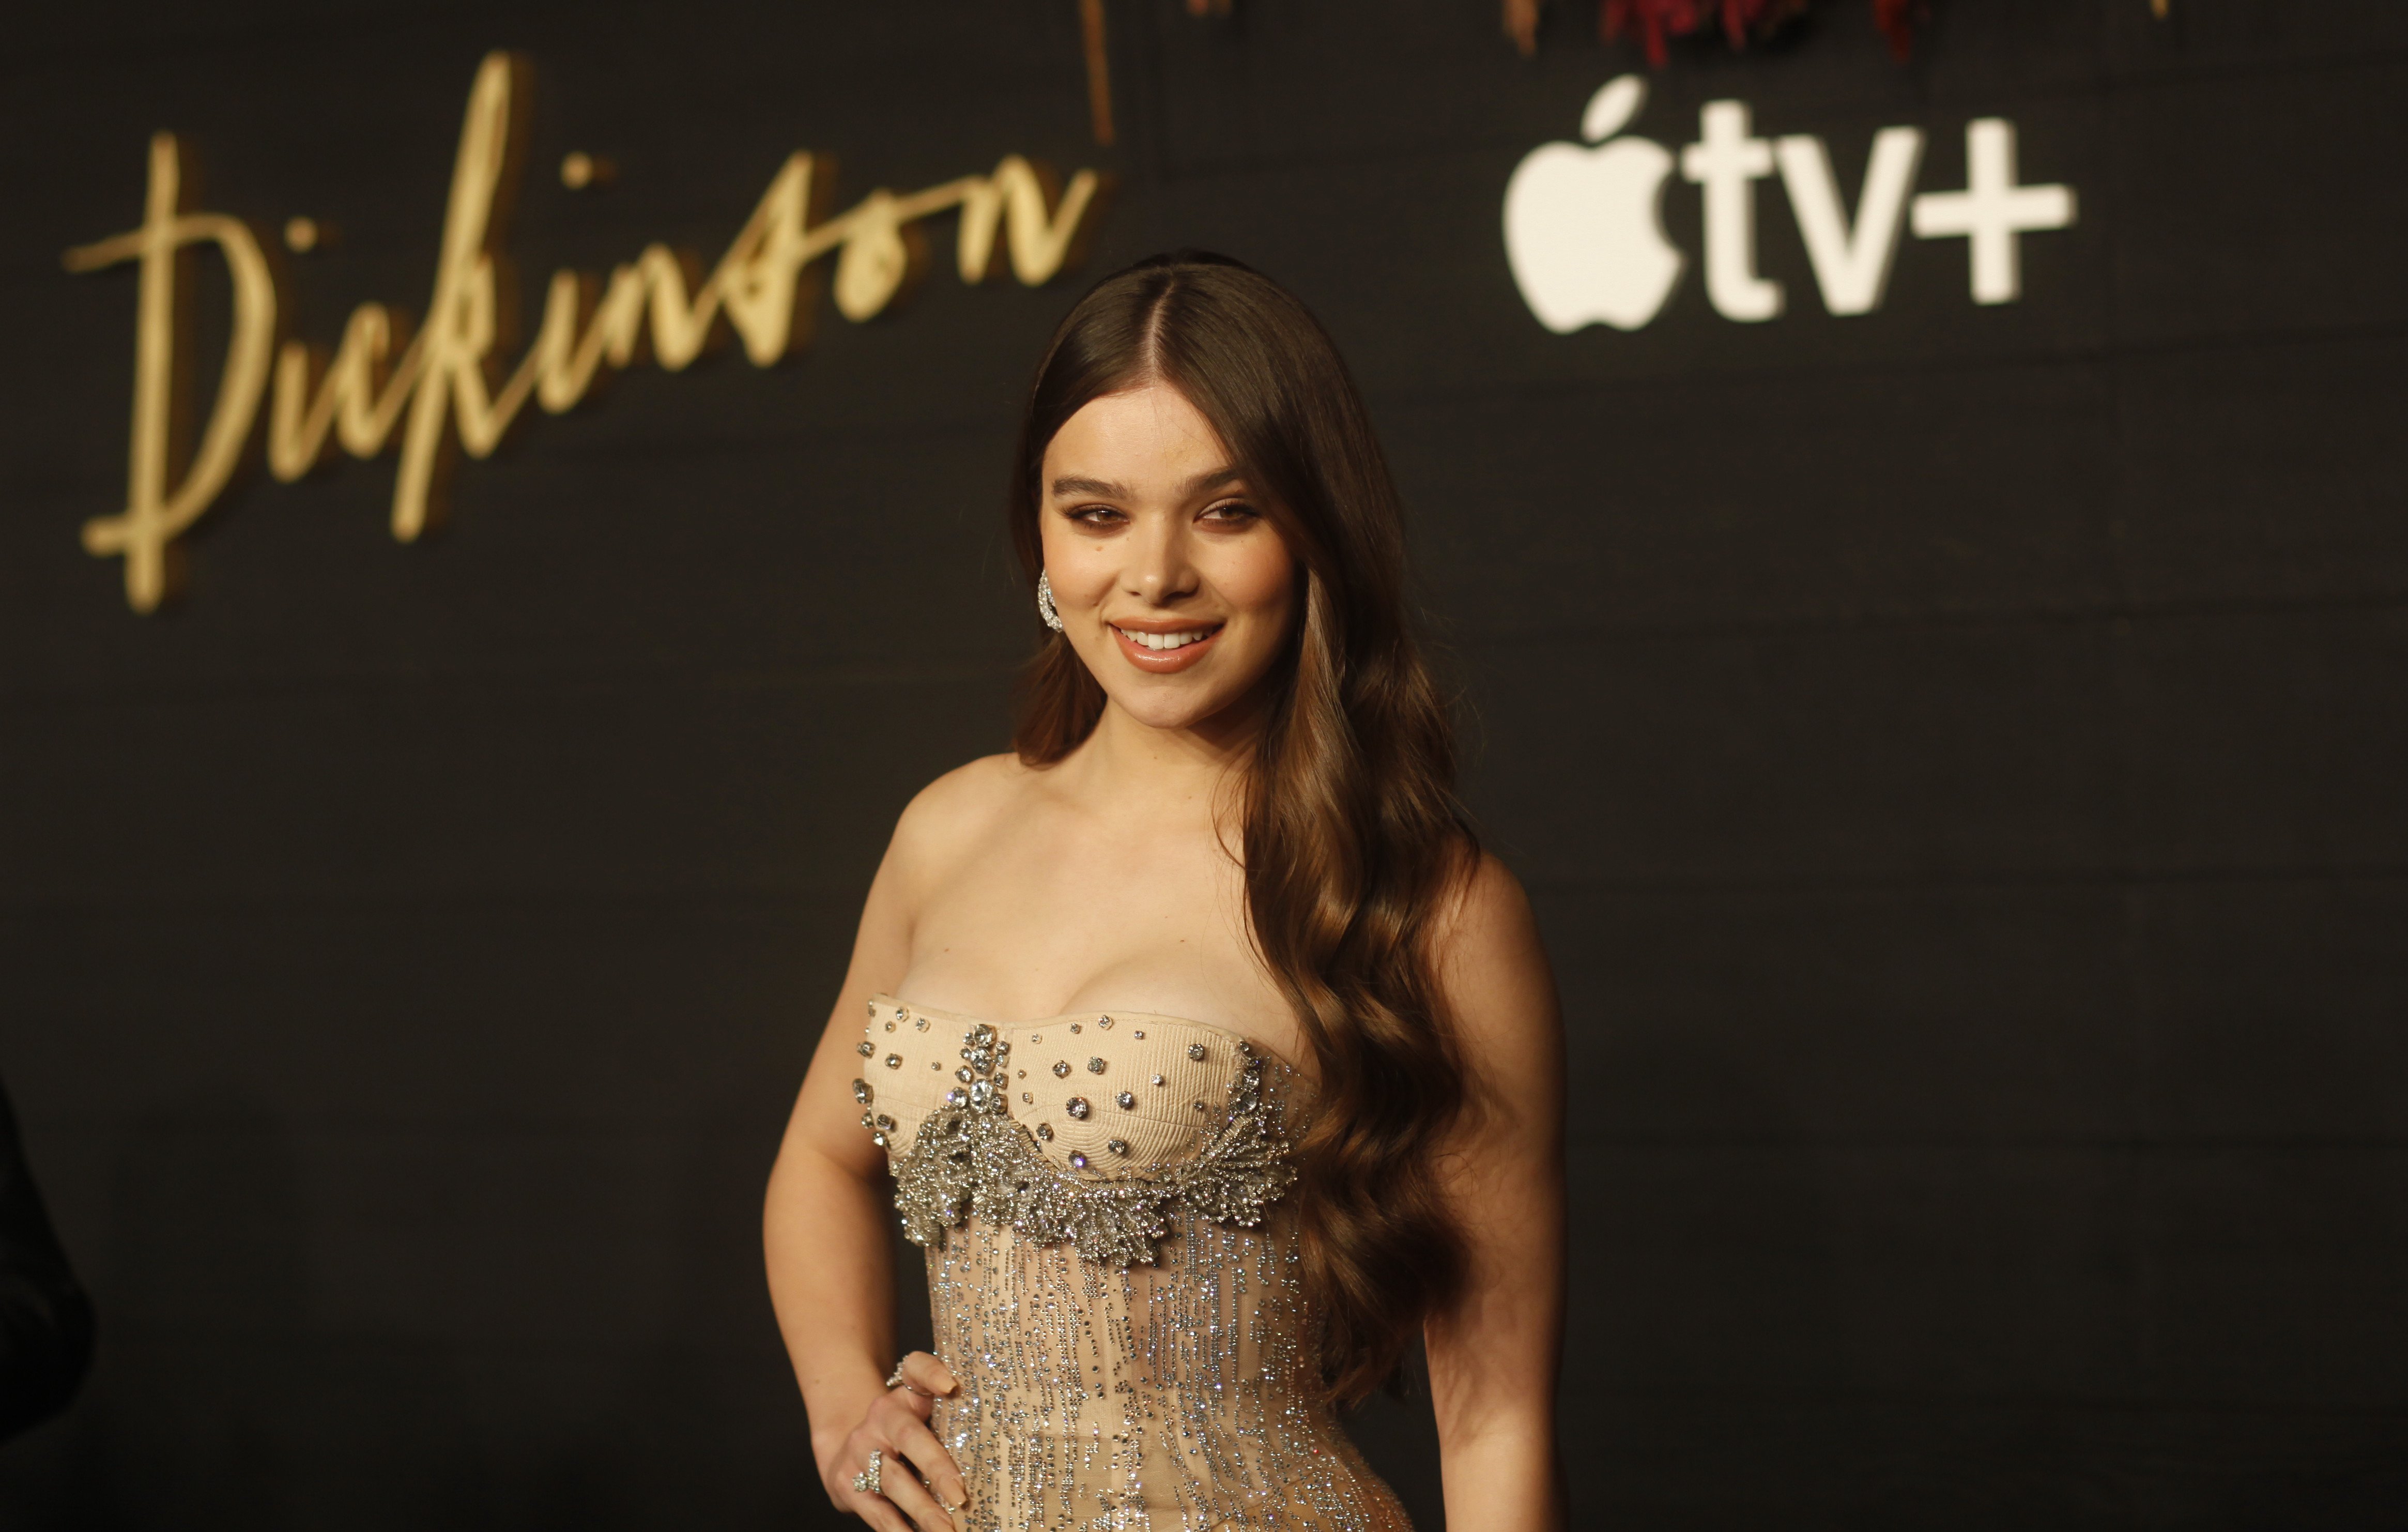 Hailee Steinfeld attends red carpet premiere of Apple's "Dickinson" on October 17, in 2019 in New York City | Photo: Shutterstock 